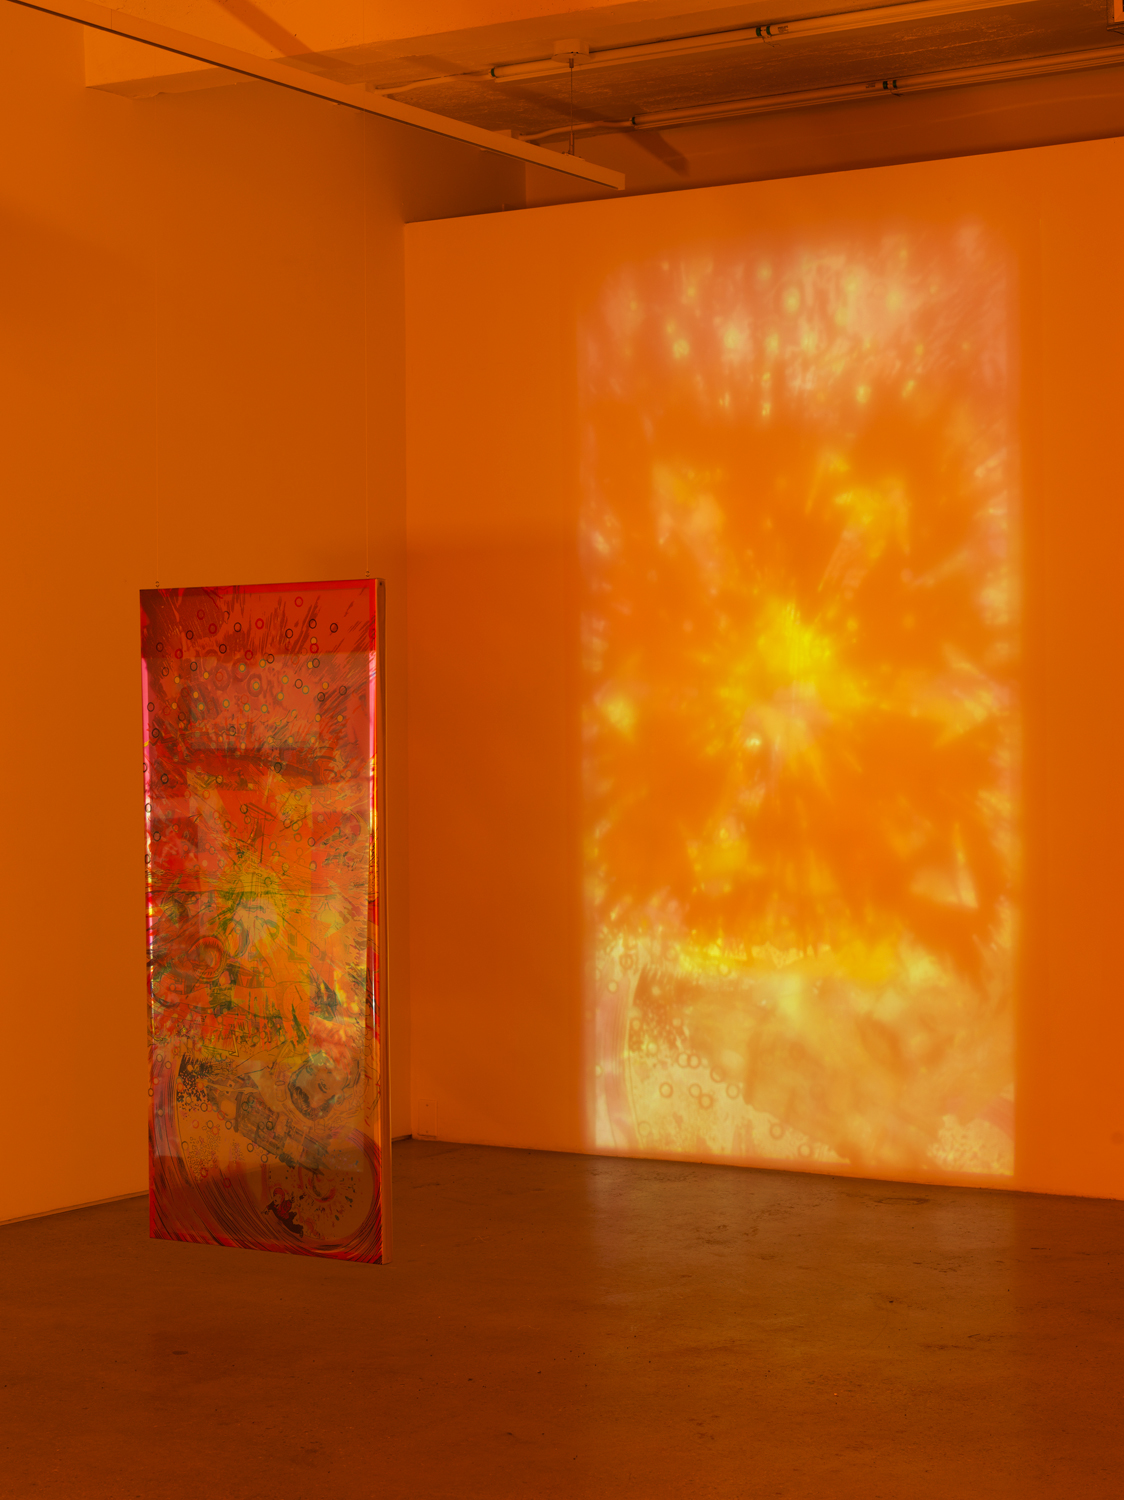 Jibade-Khalil Huffman, Untitled (Explosion), 2020, Inkjet on transparencies, looping video, 60.25h x 27.13w x 1.50d in.